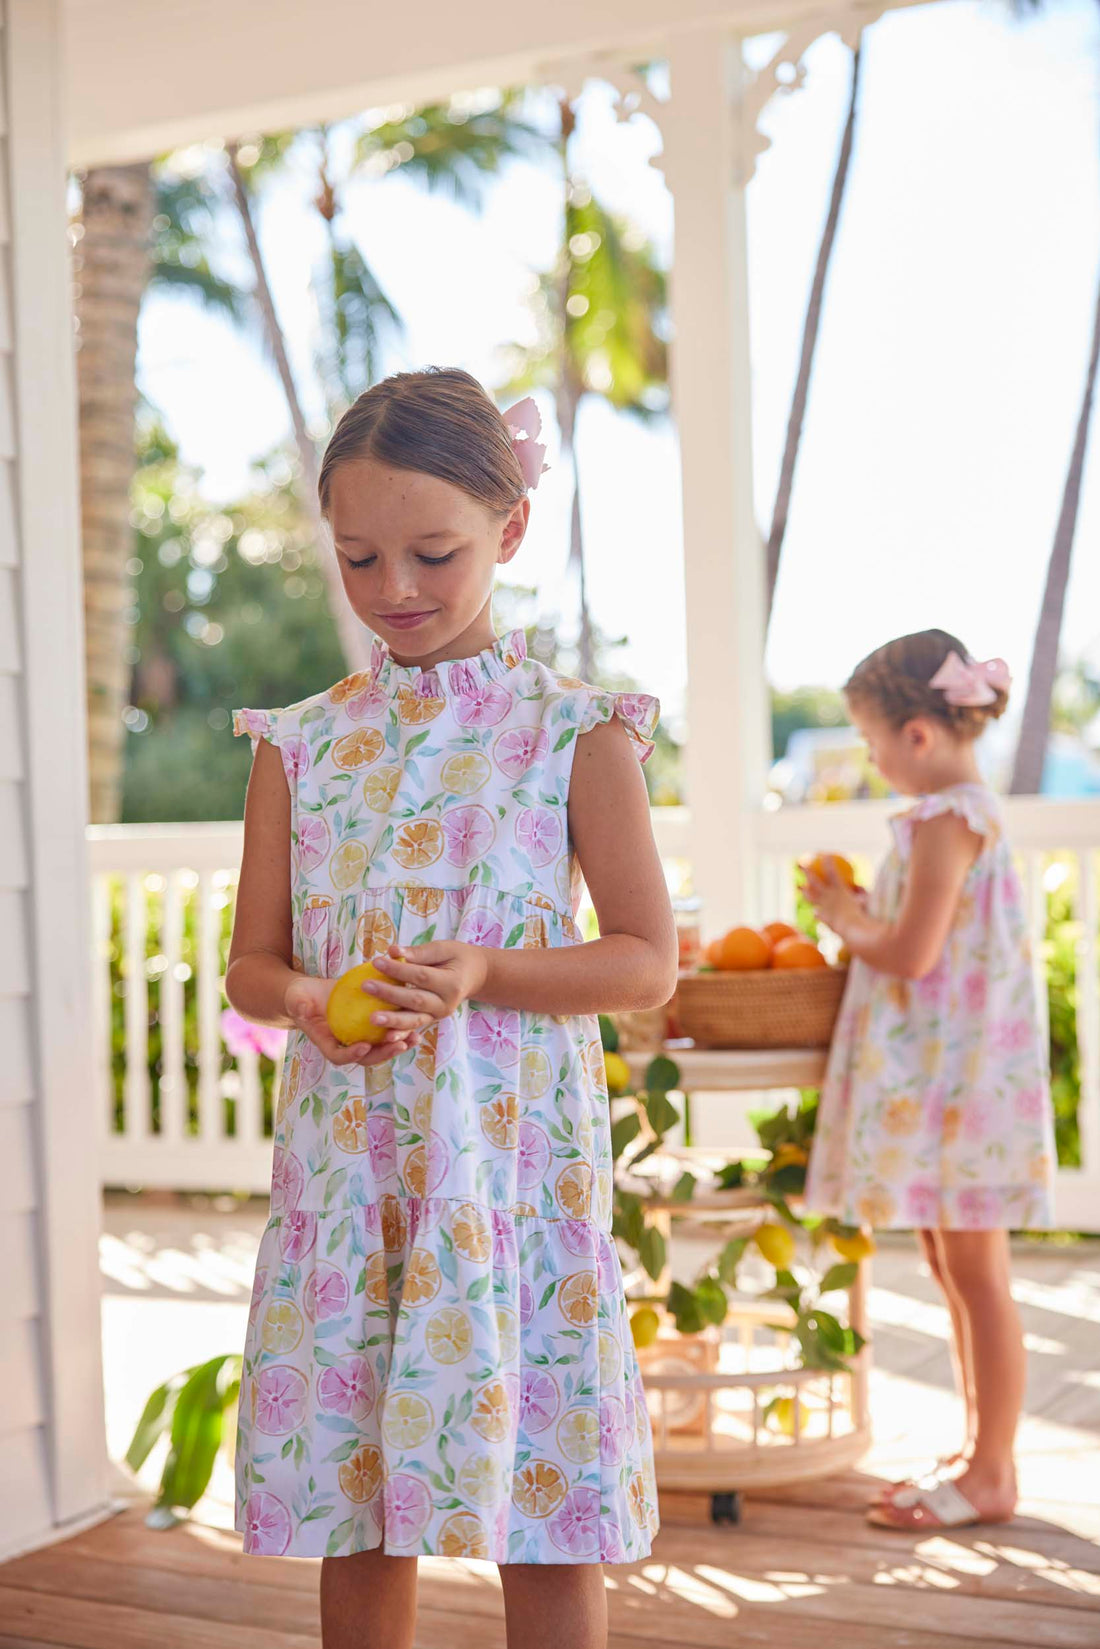 classic childrens clothing girls dress with ruffled collar and sleeves in citrus print